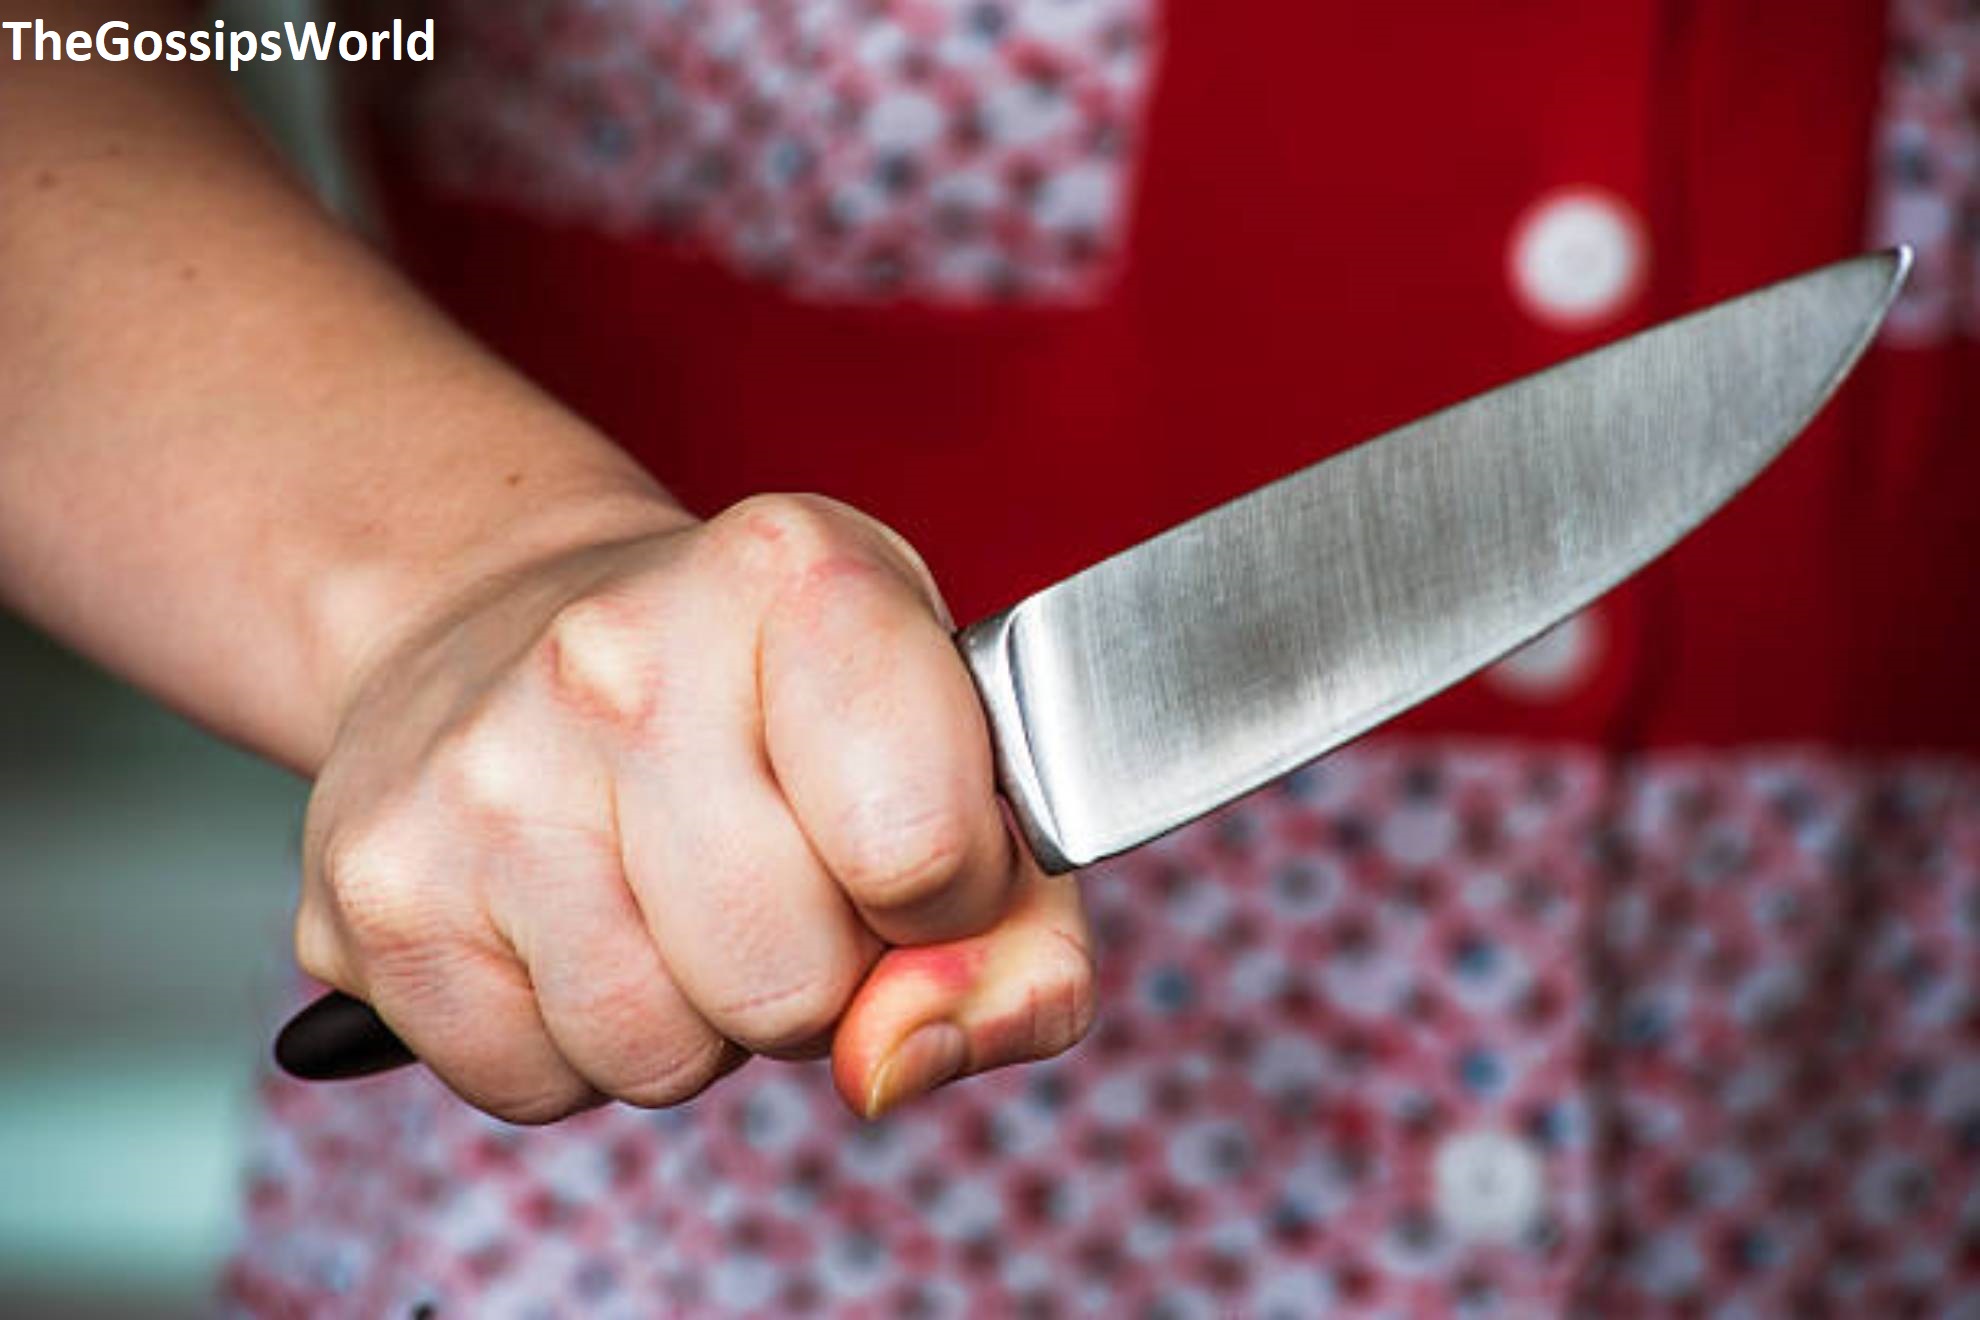 A 36-Year-Old UP Woman Chops Off Boyfriend's Genital Incident